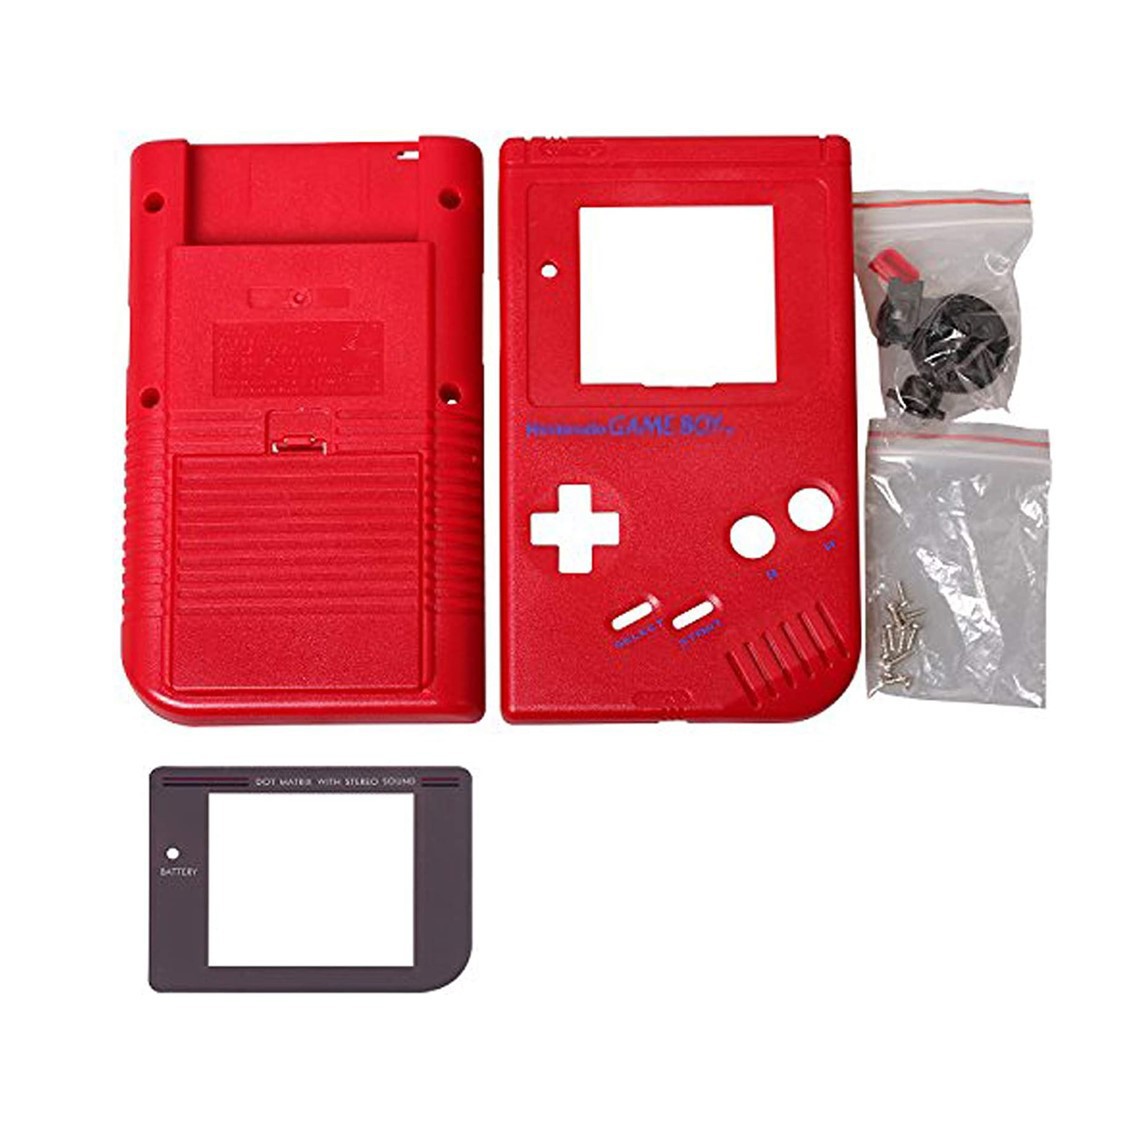 Gameboy Classic Shell - Red - Gameboy Classic Hardware